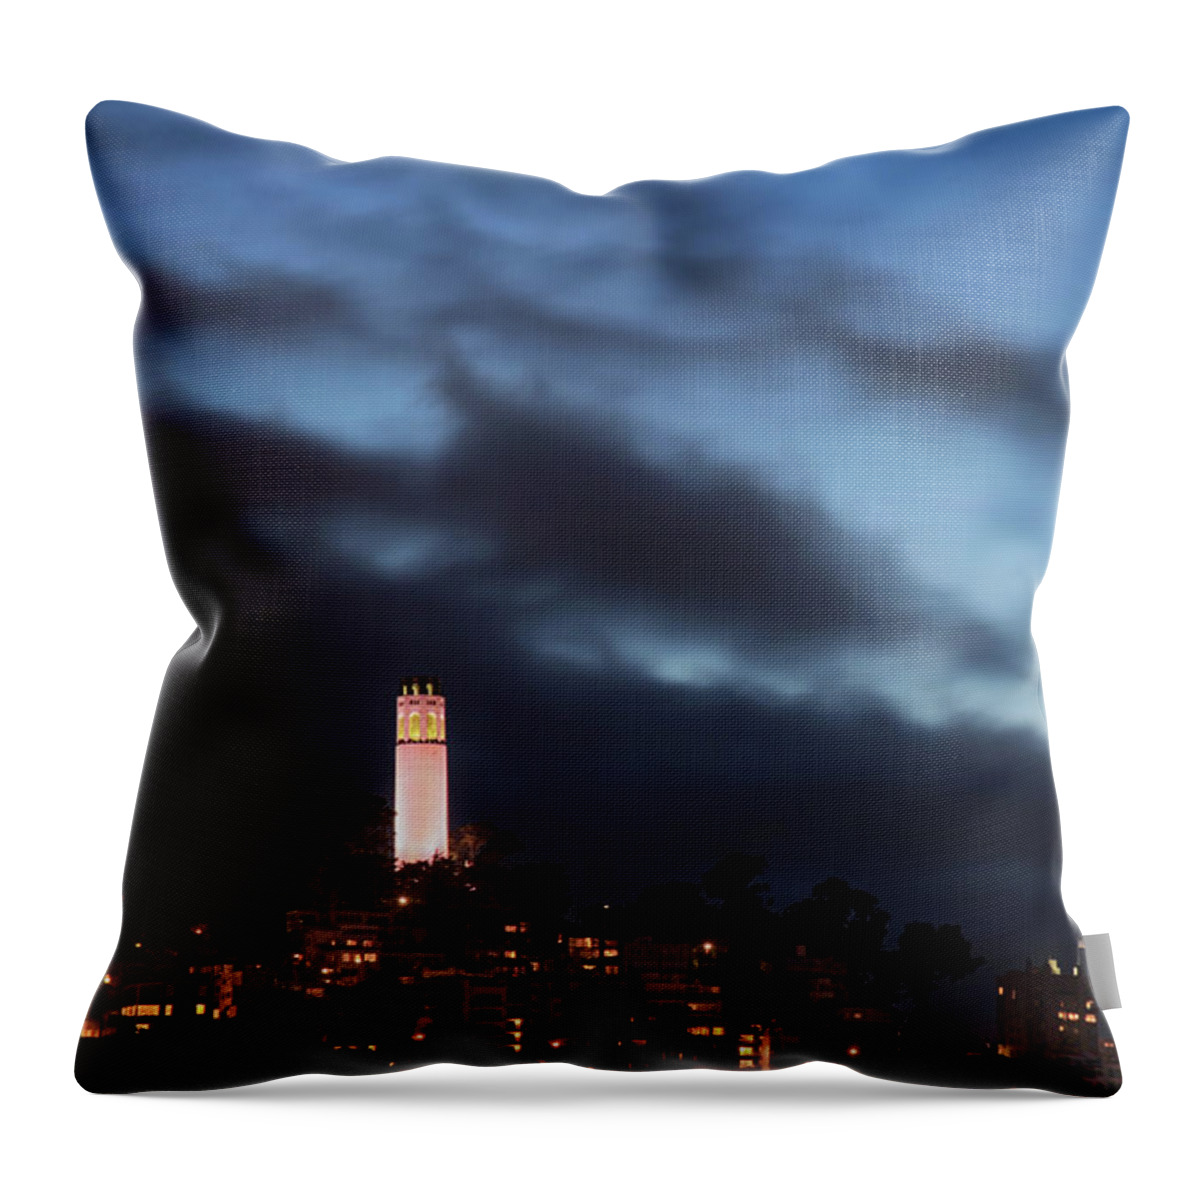 Coit Tower Throw Pillow featuring the photograph Until It's Over by Laurie Search